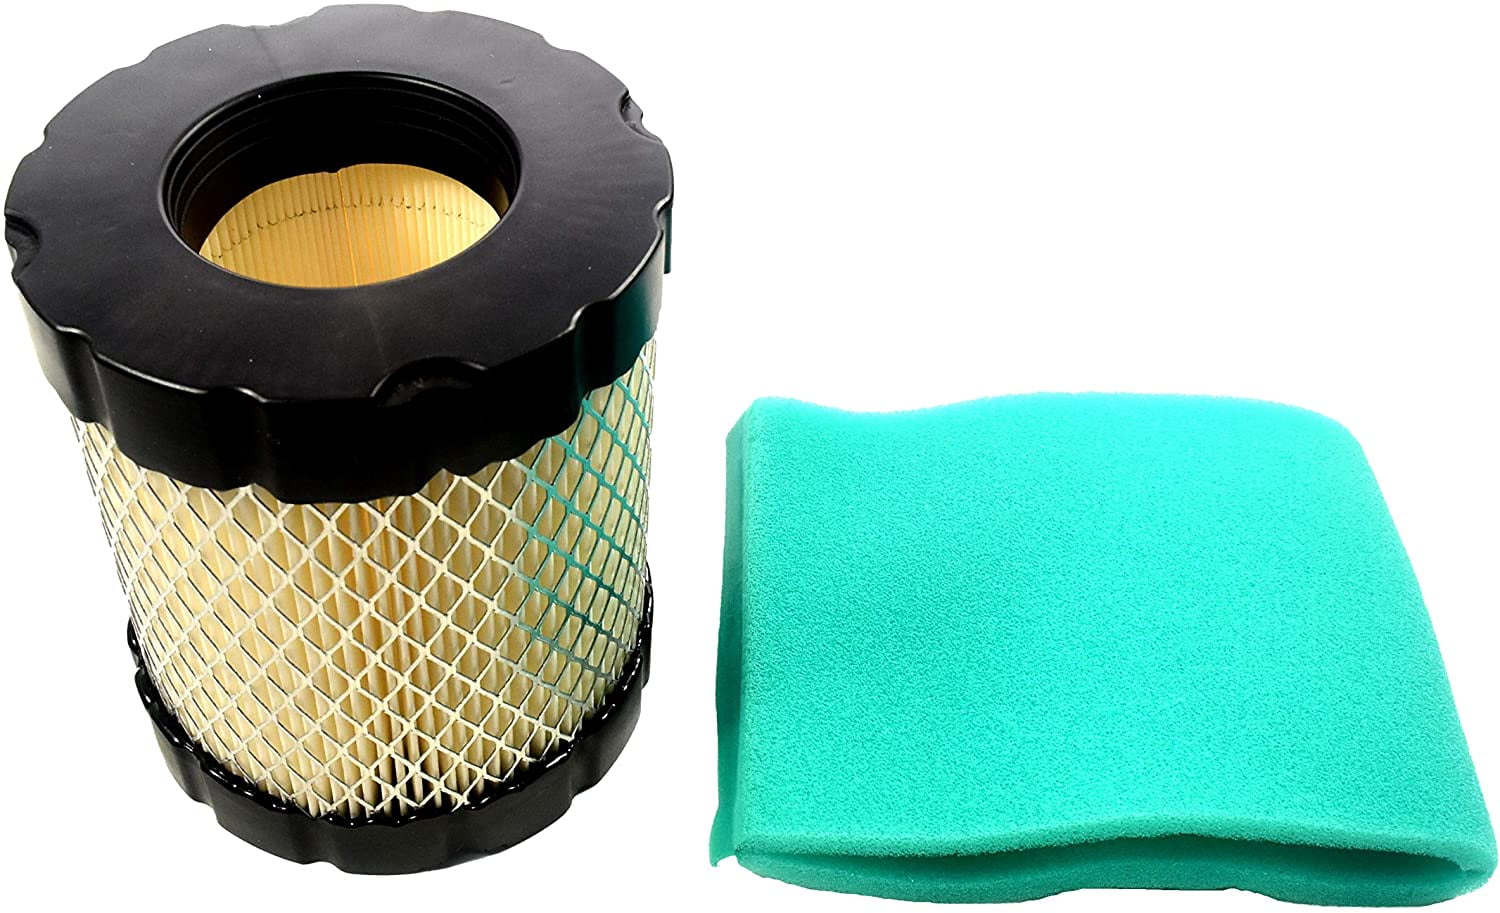 Details about   Air Filter For Briggs & Stratton 798897 794935 44M977 44P977 49M977 MIU1312 